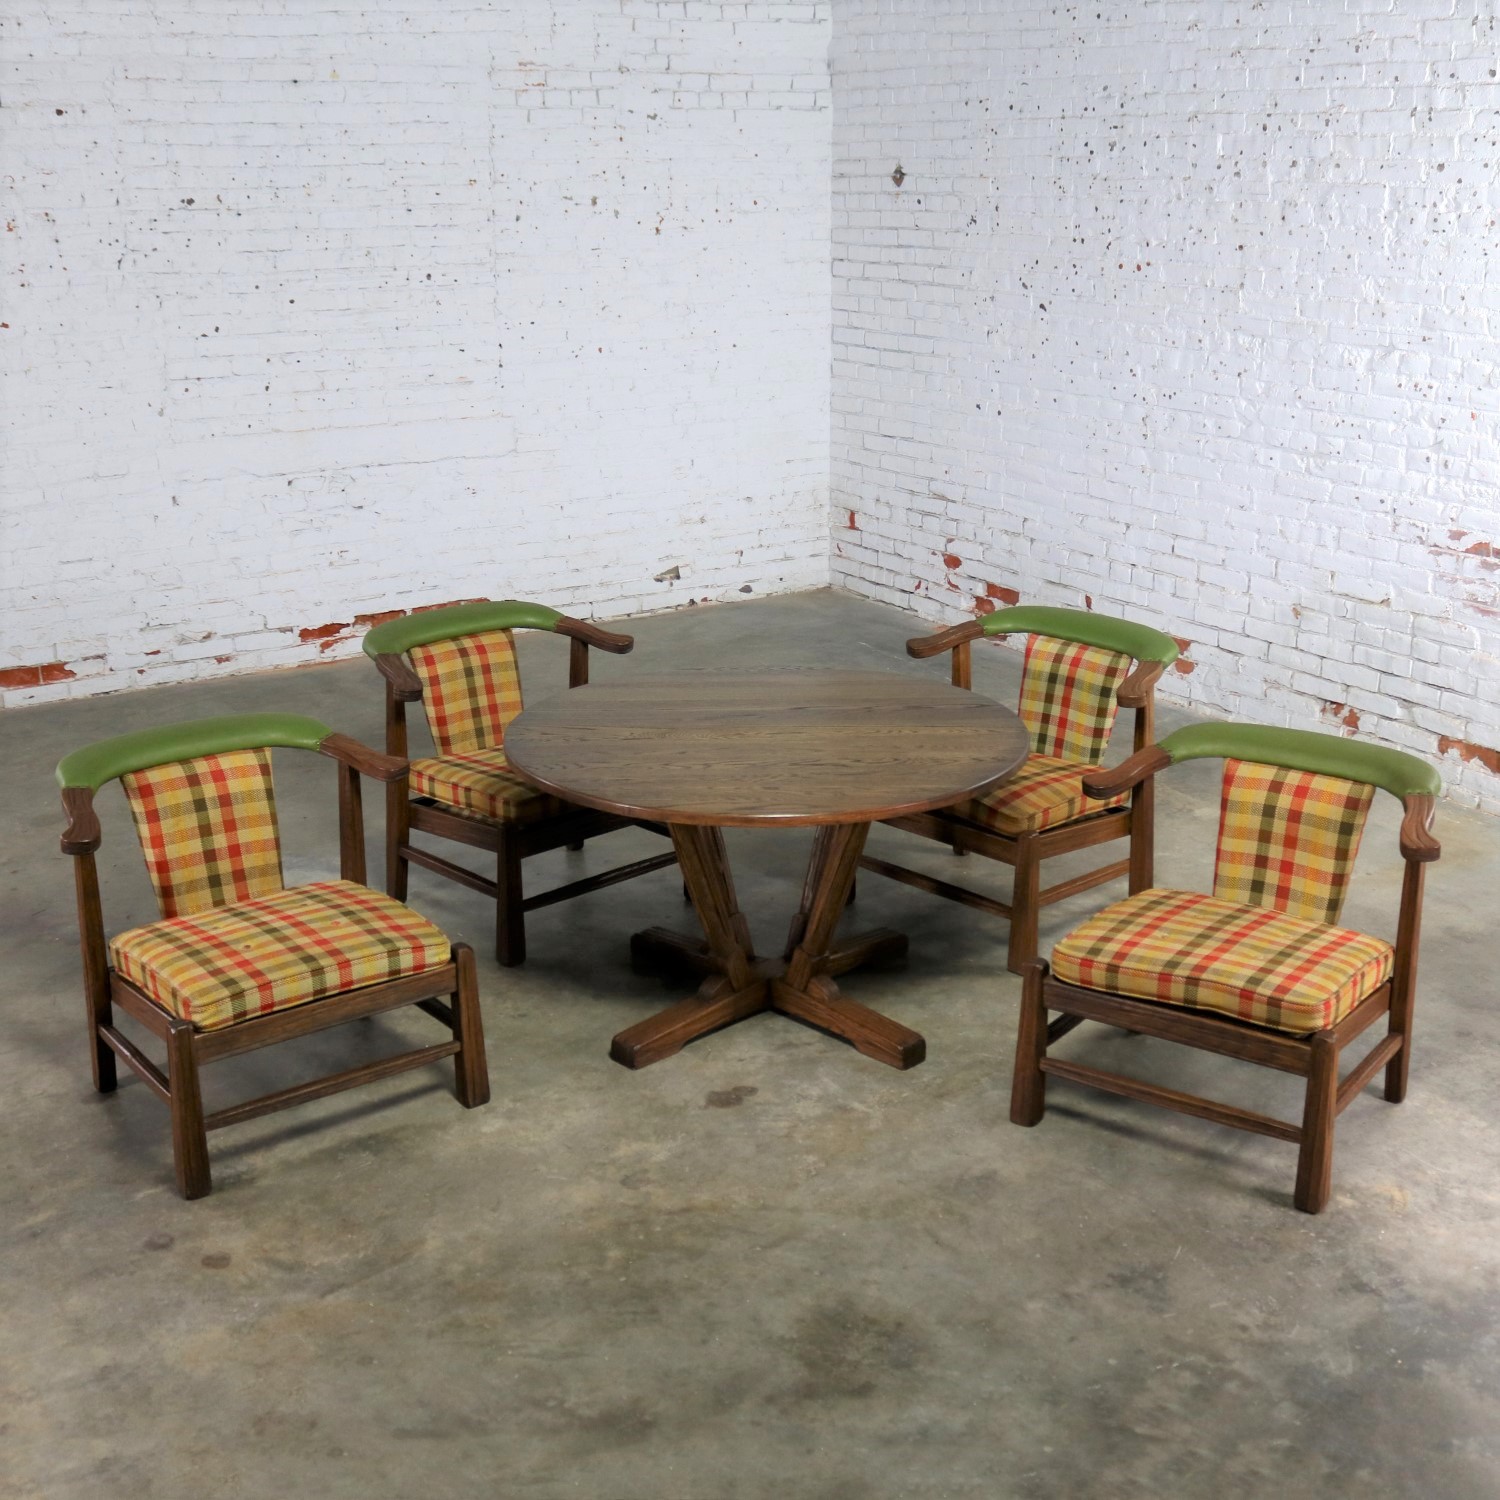 Brandt Company Ranch Oak Brunch or Game Table and Four Chairs